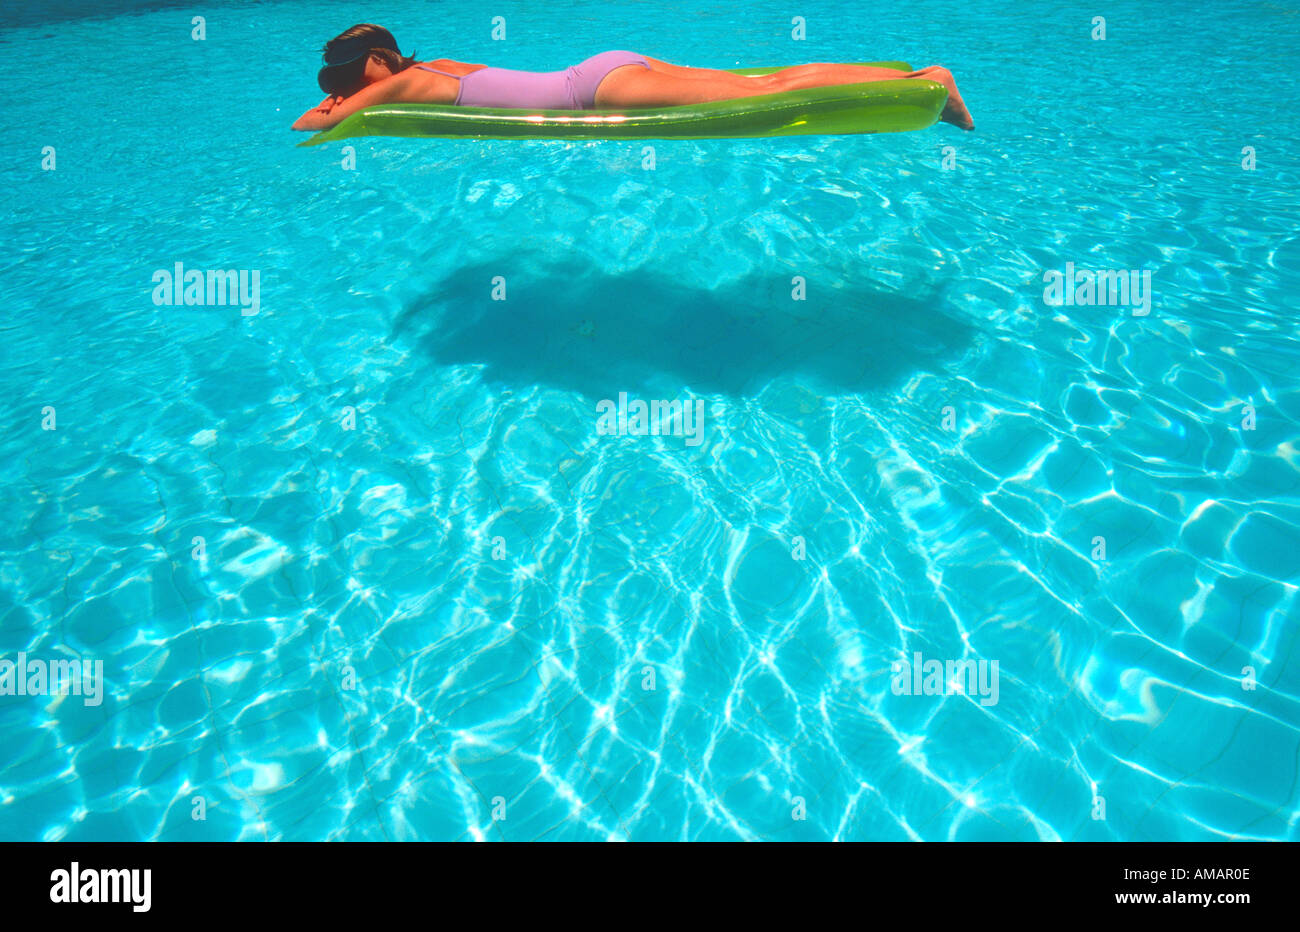 woman female floating on inflatable air bed lilo on water in bright blue swimming pool Stock Photo